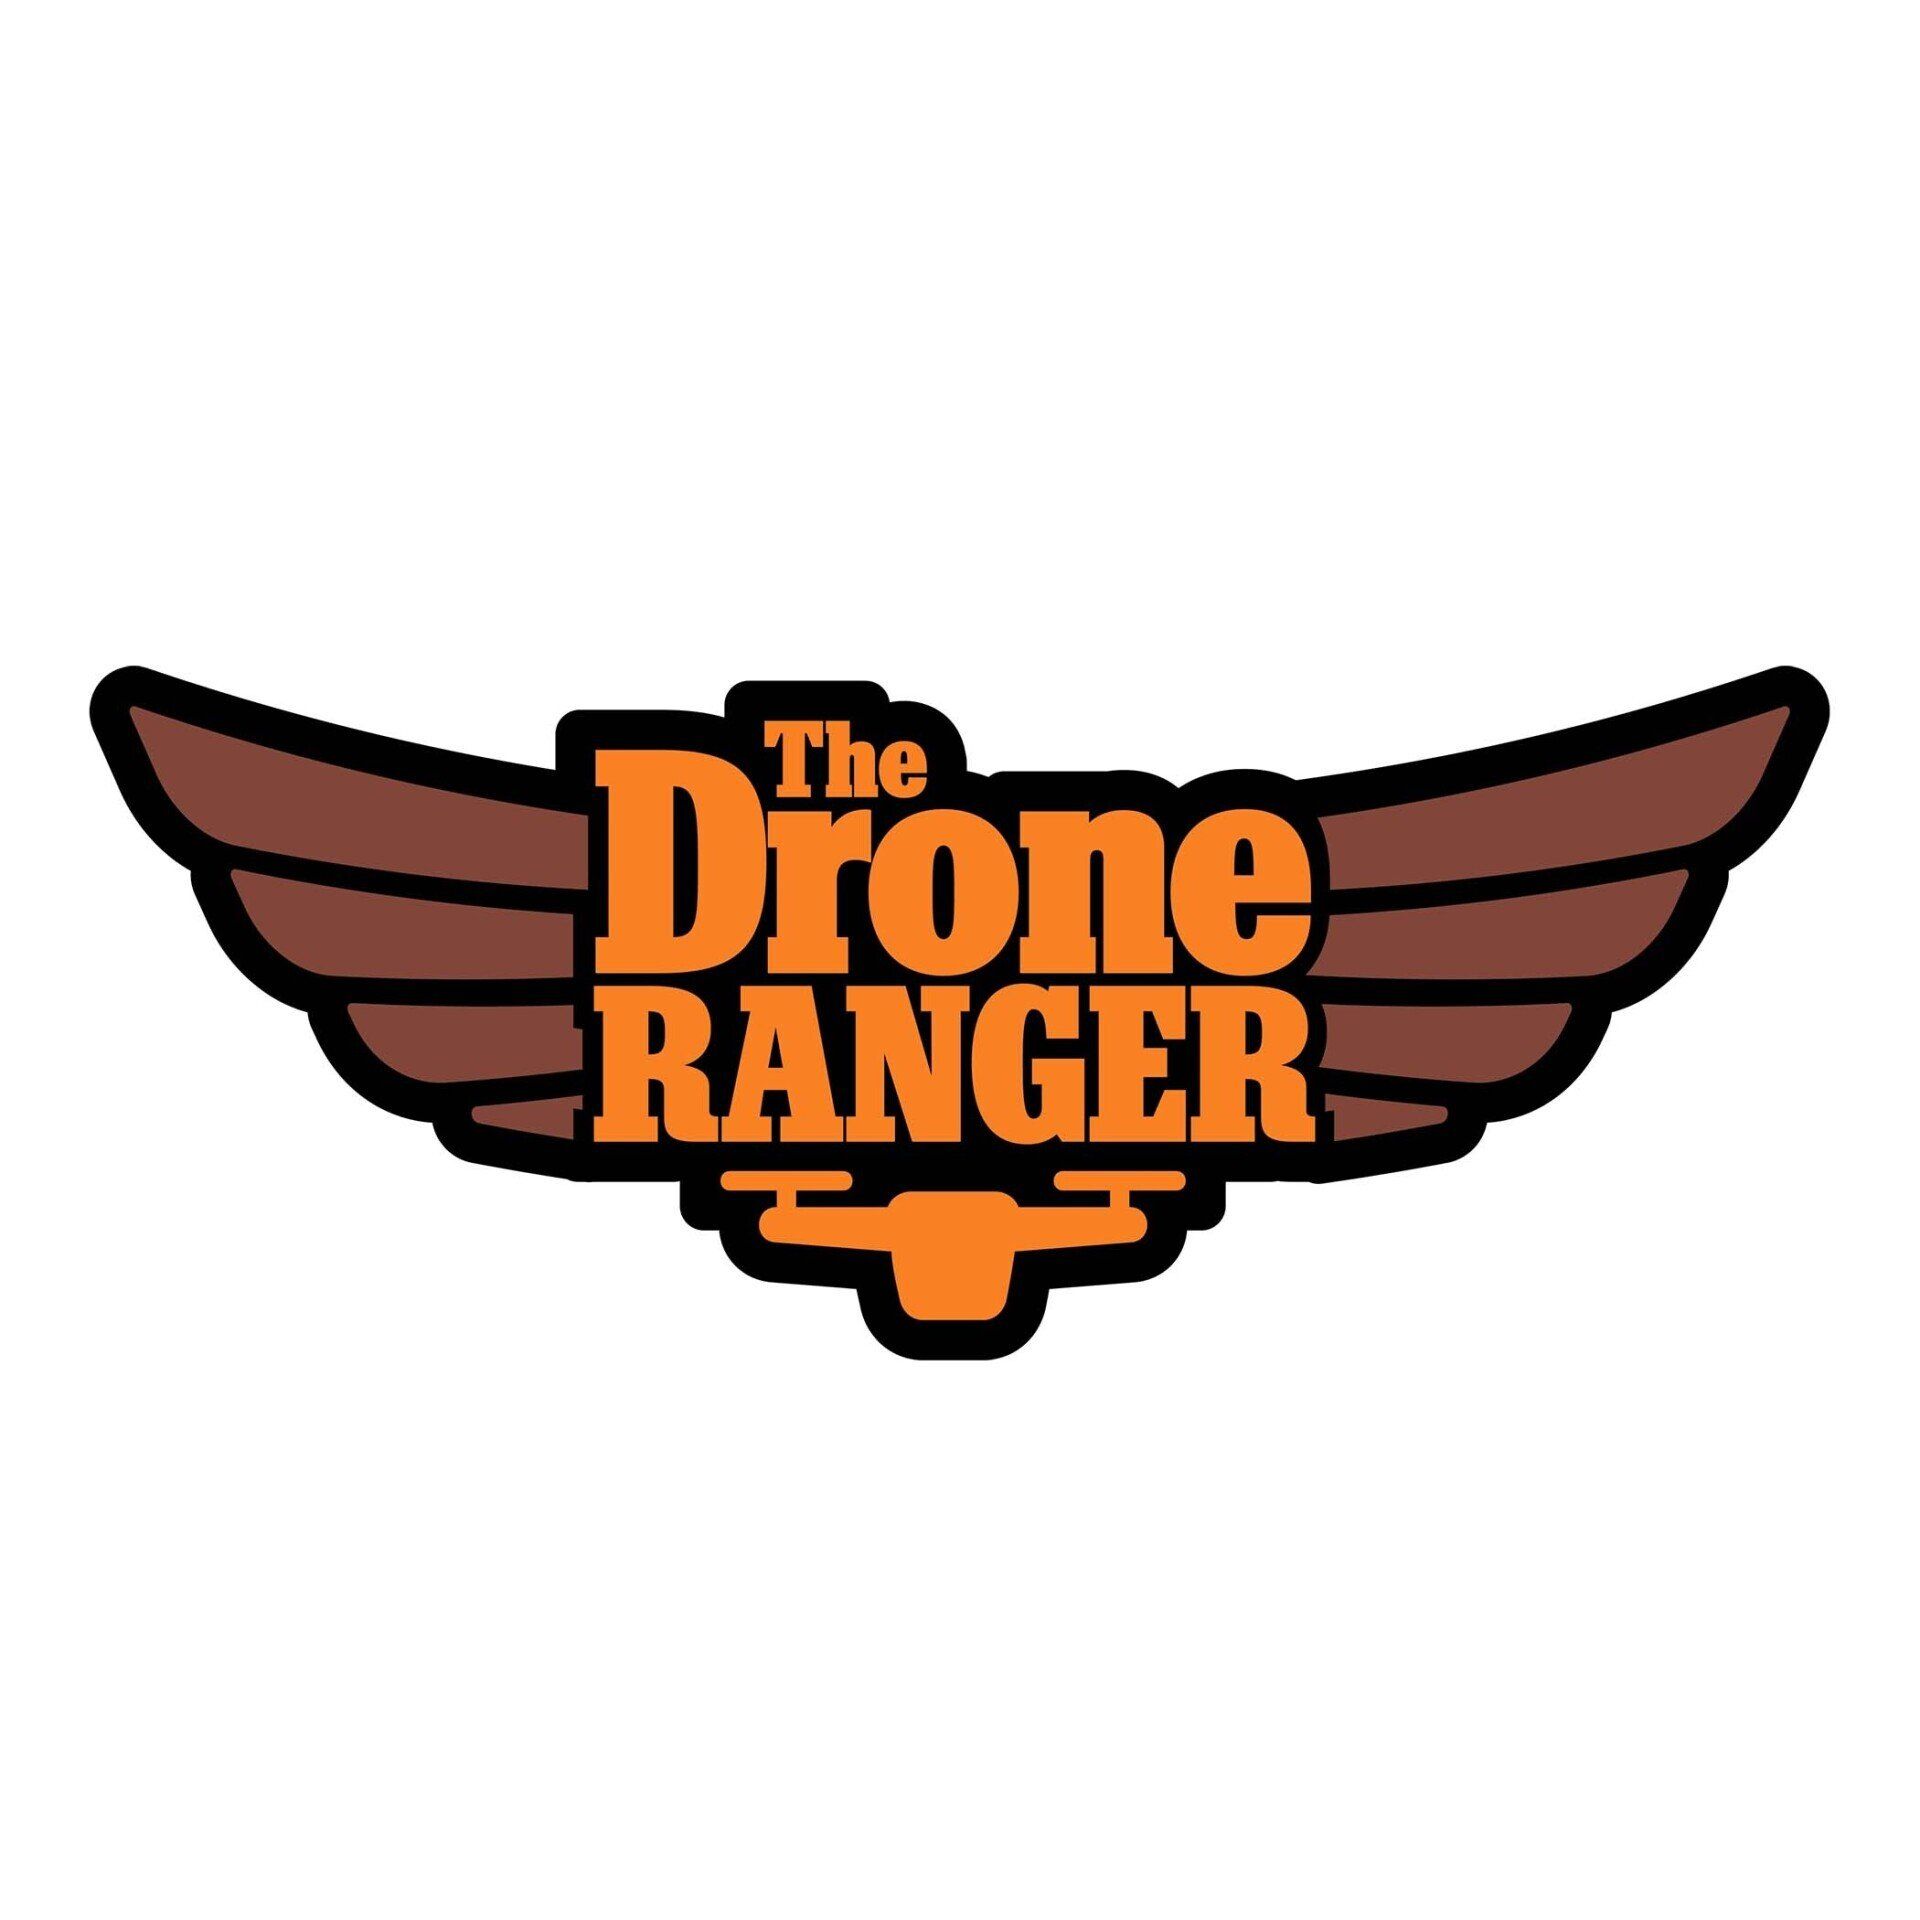 A logo for the drone ranger with wings on a white background.